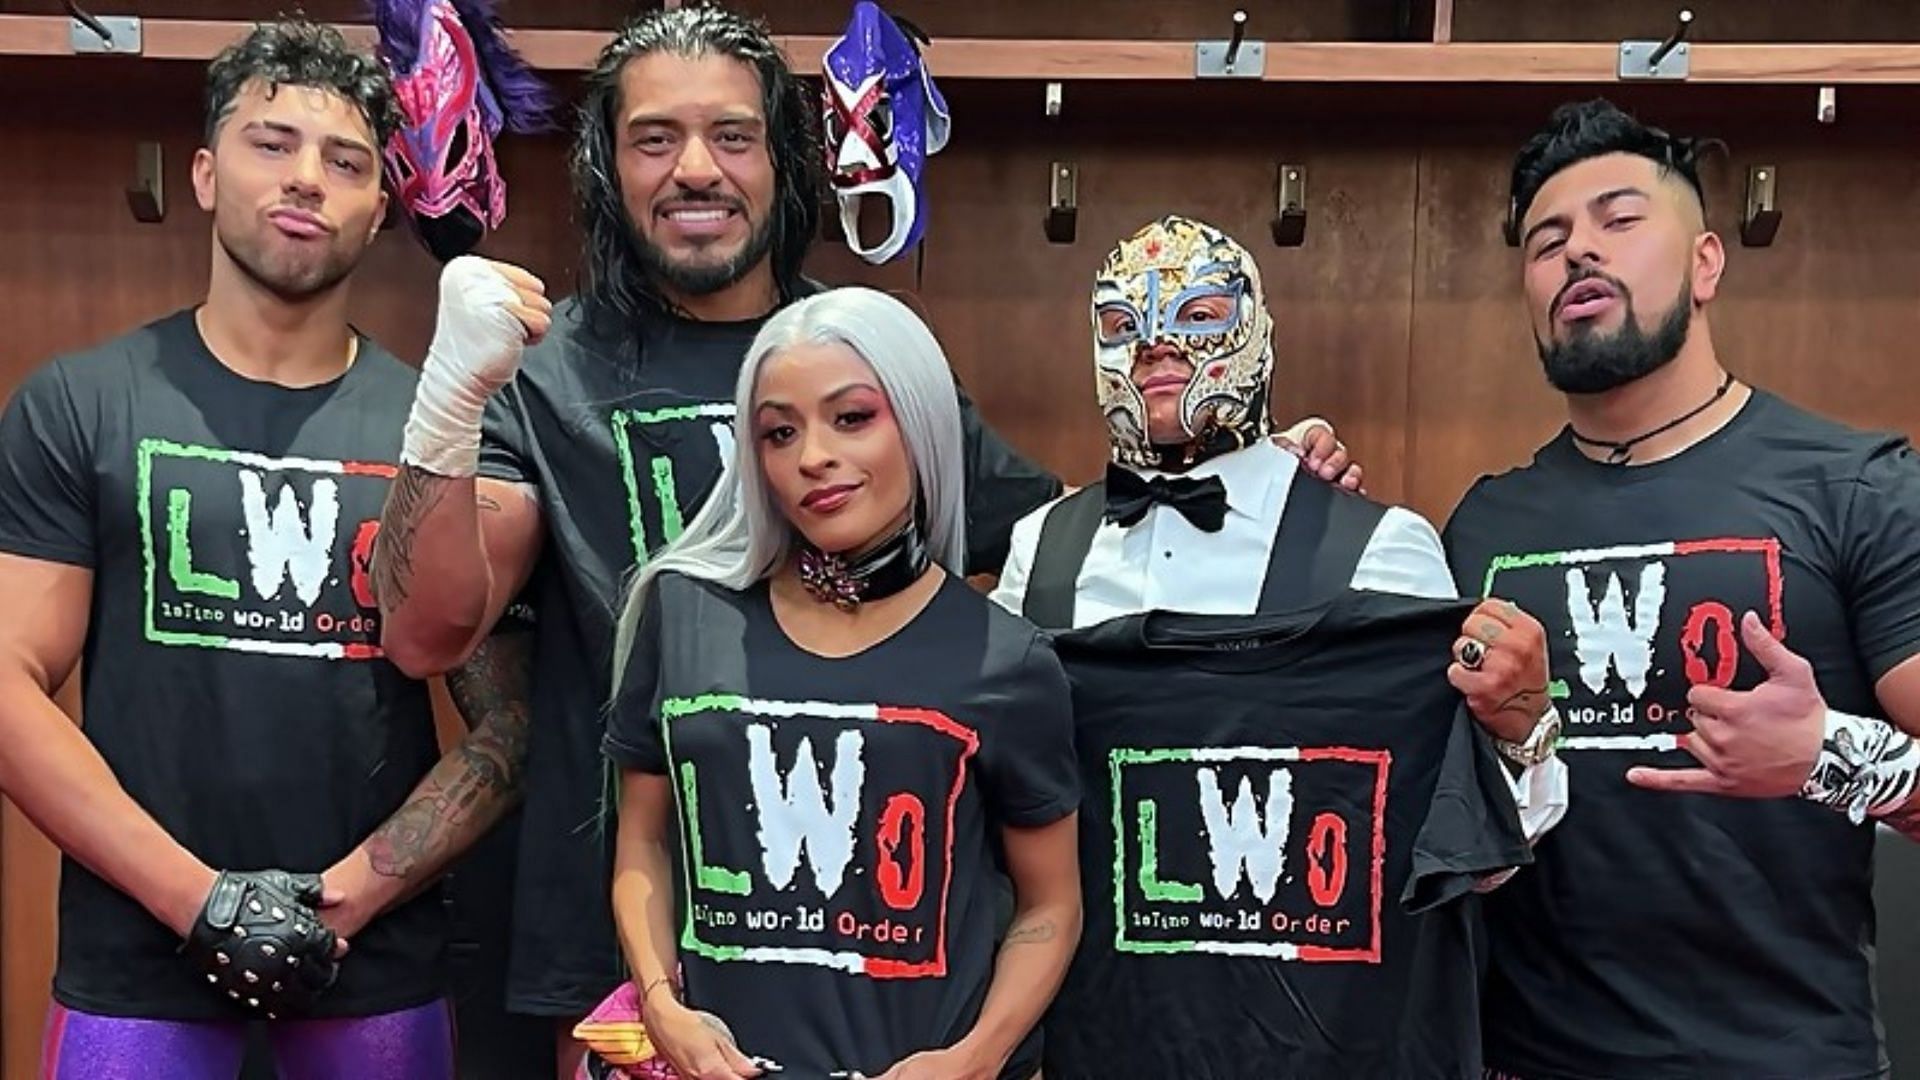 L.W.O. was formed before the Hall of Fame 2023 on WWE SmackDown.